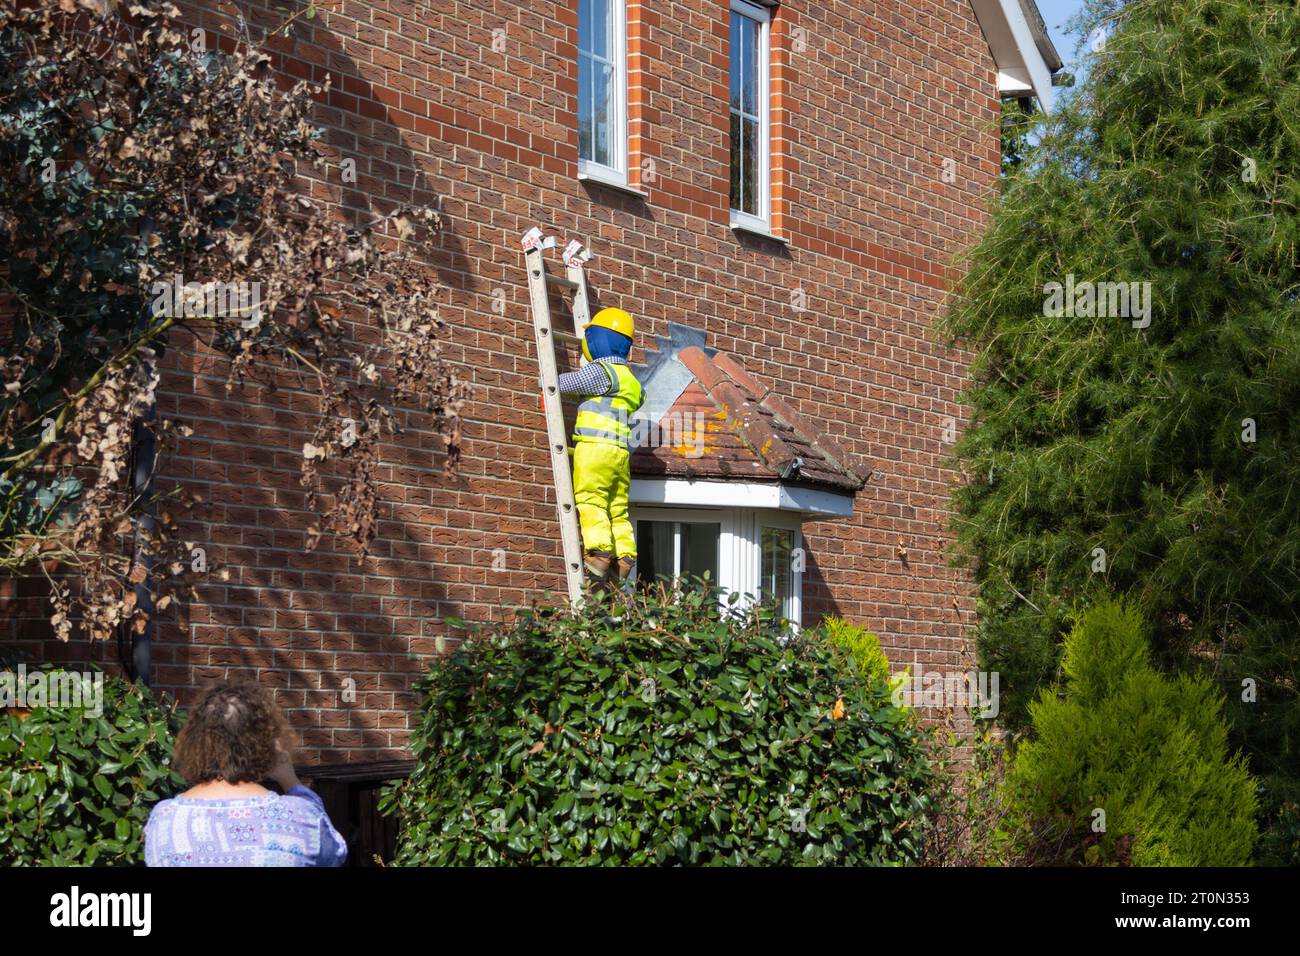 Hamstreet, Kent, UK. 8th Oct, 2023. The annual scarecrow trail is underway in the village of Hamstreet near Ashford, Kent. Scores of visitors are attracted to this event from surrounding neighbourhoods. Photographer: Paul Lawrenson, Photo Credit: PAL News/Alamy Live News Stock Photo